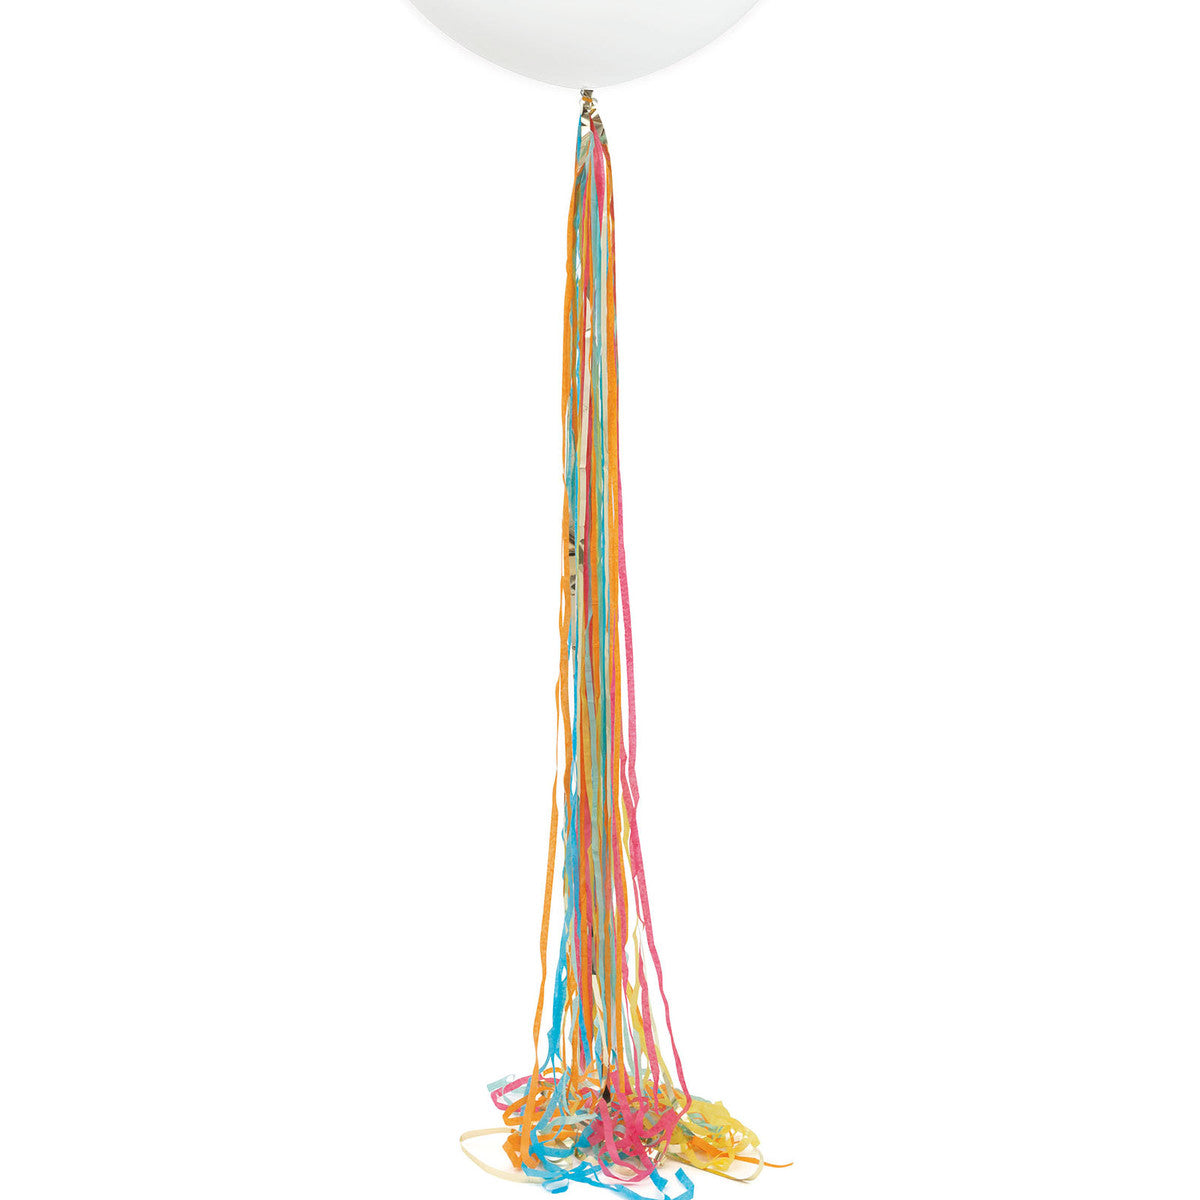 We'll work with you to determine the best solution for your needs 1.82m  Foil Tassel Balloon Tail - Multi Meteor